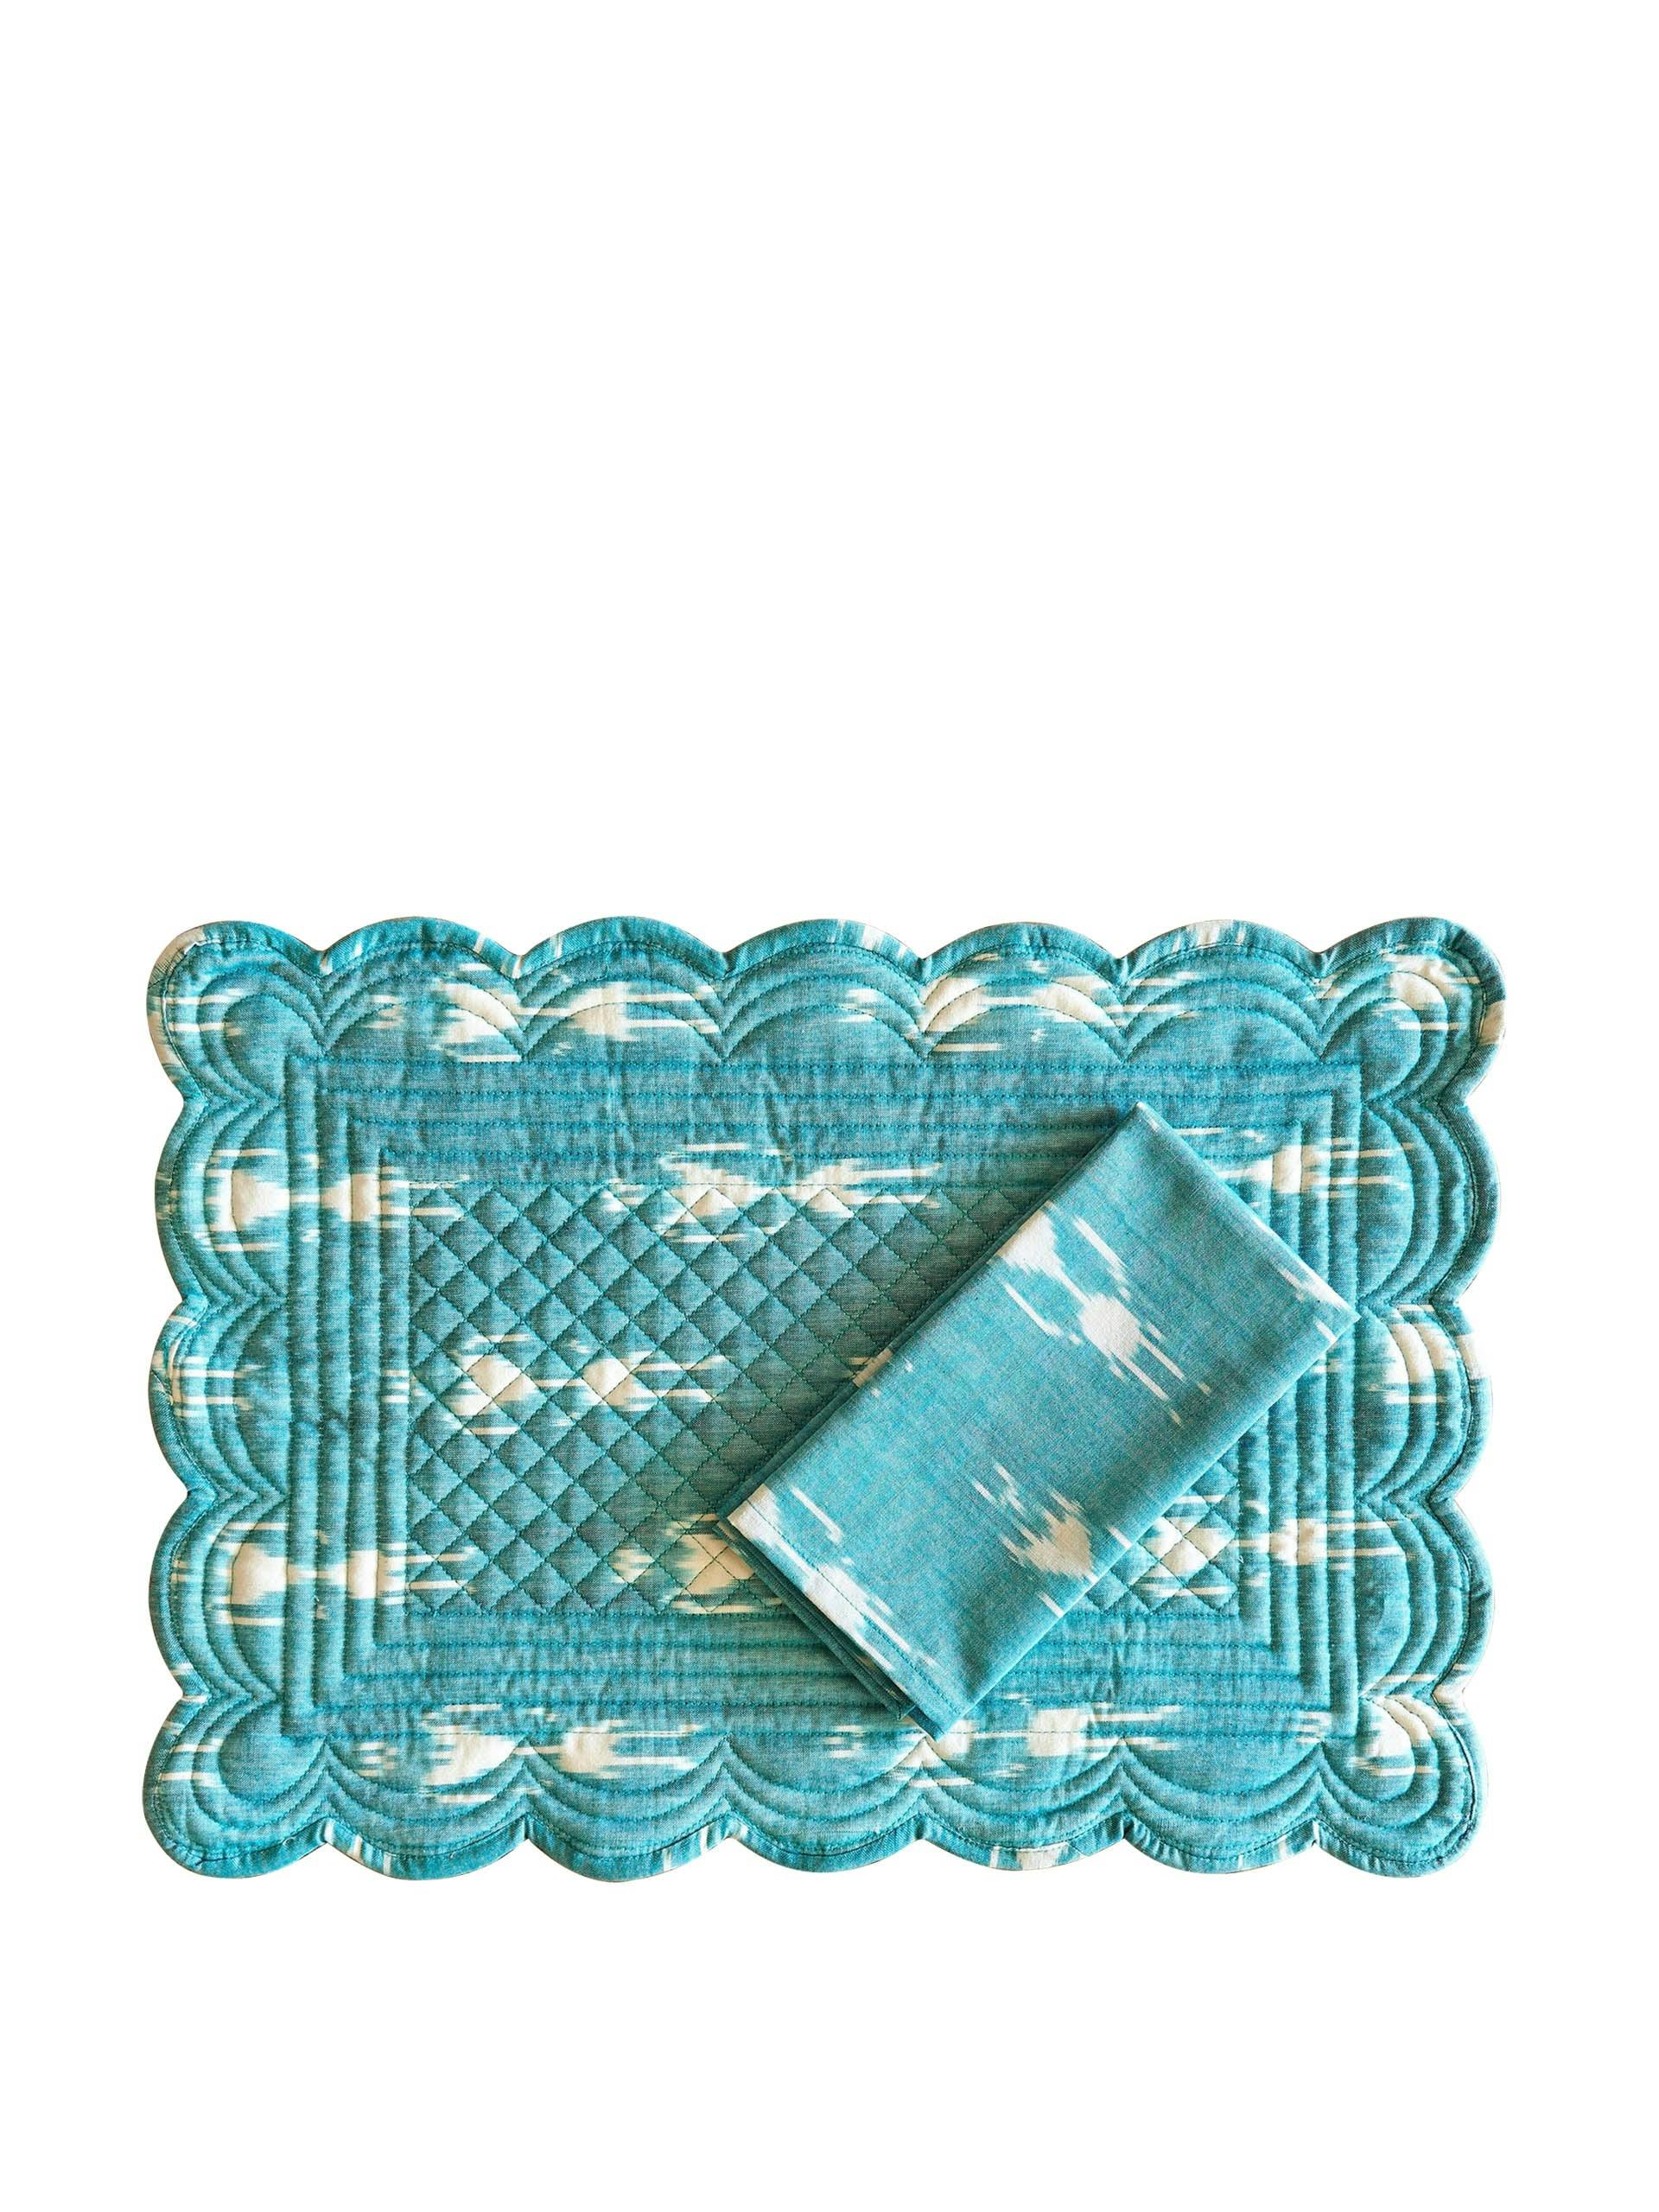 Scalloped quilted ikat placemat and napkin set